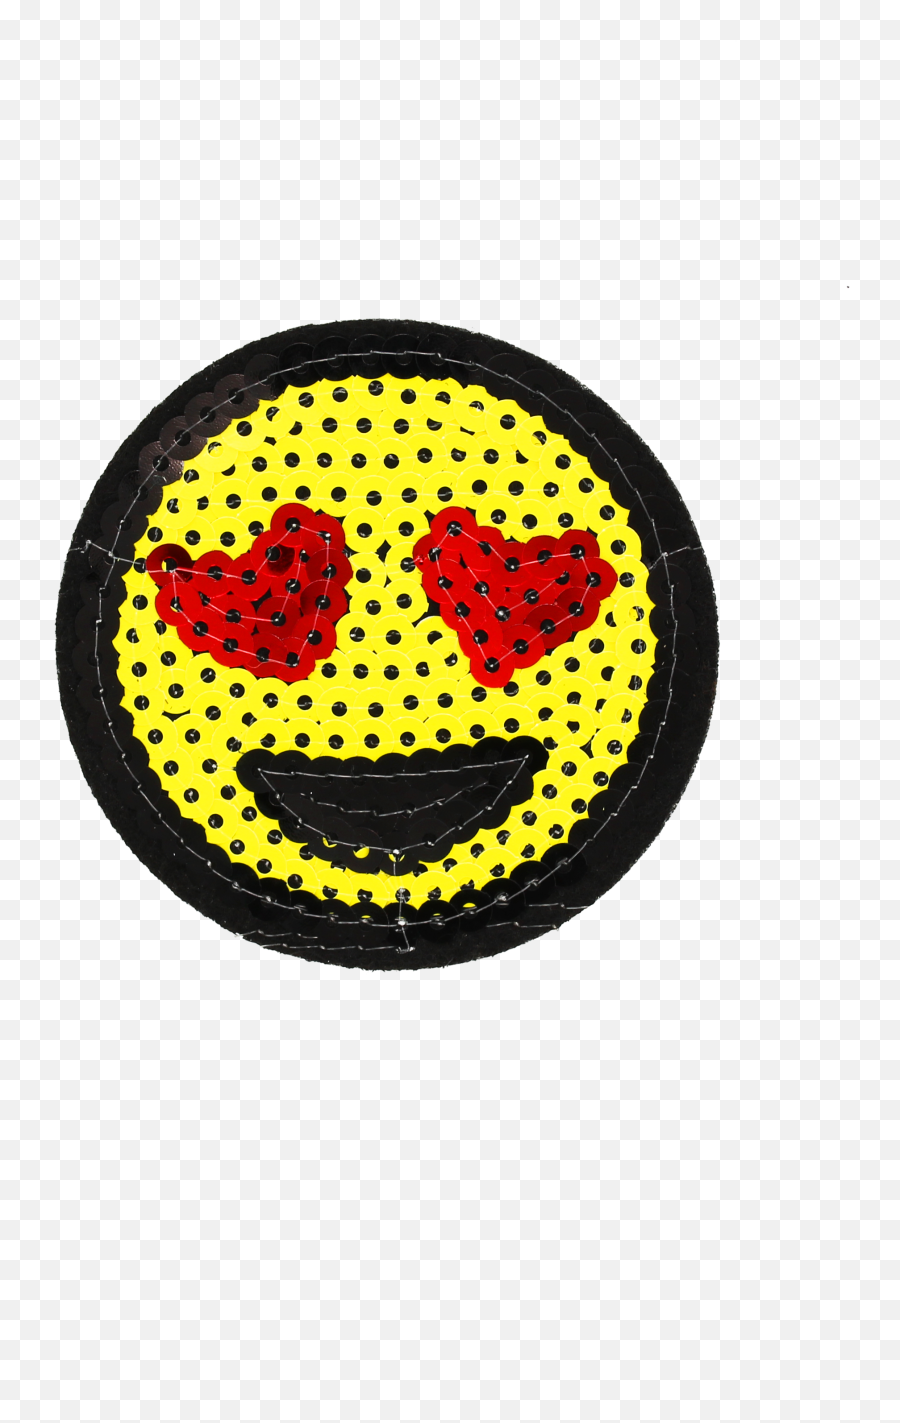 Download Hd Sequins Smiley Face With Heart Shape Eyes Patch - Watches Icons Clipart Emoji,Emoticon Without Eyes